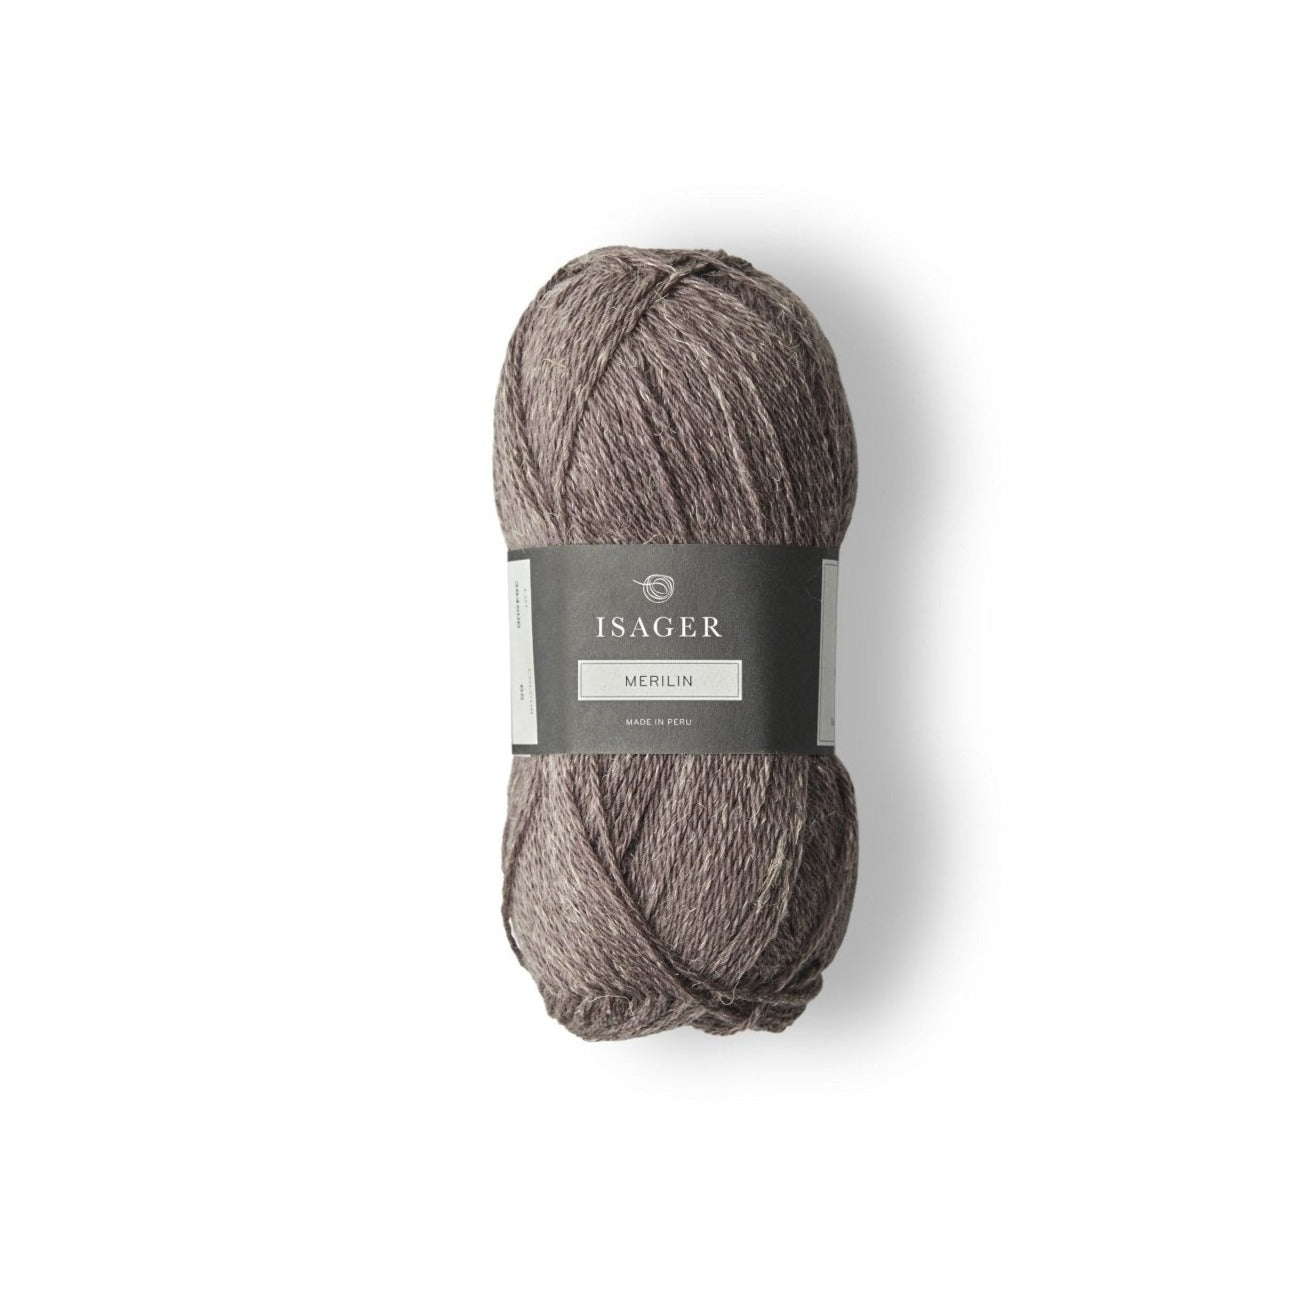 Isager Merilin - 65 - 3 Ply - Isager - The Little Yarn Store